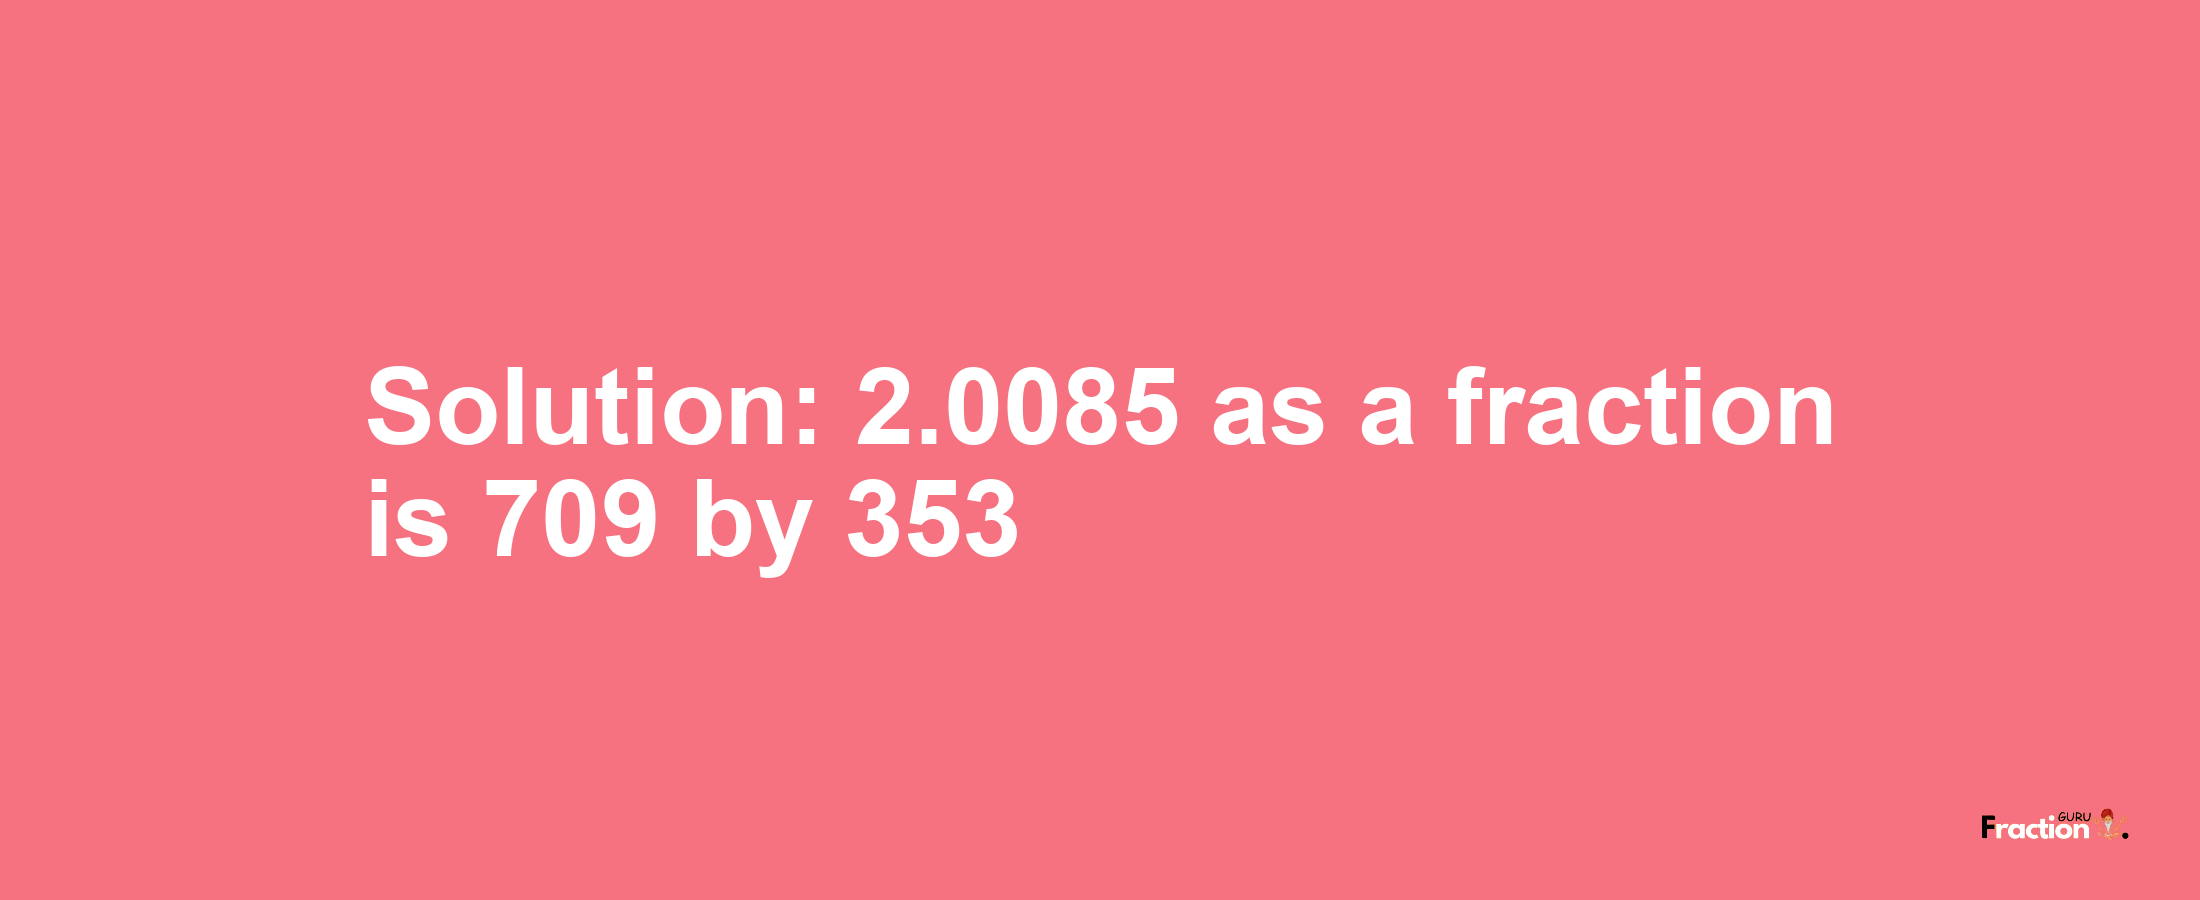 Solution:2.0085 as a fraction is 709/353